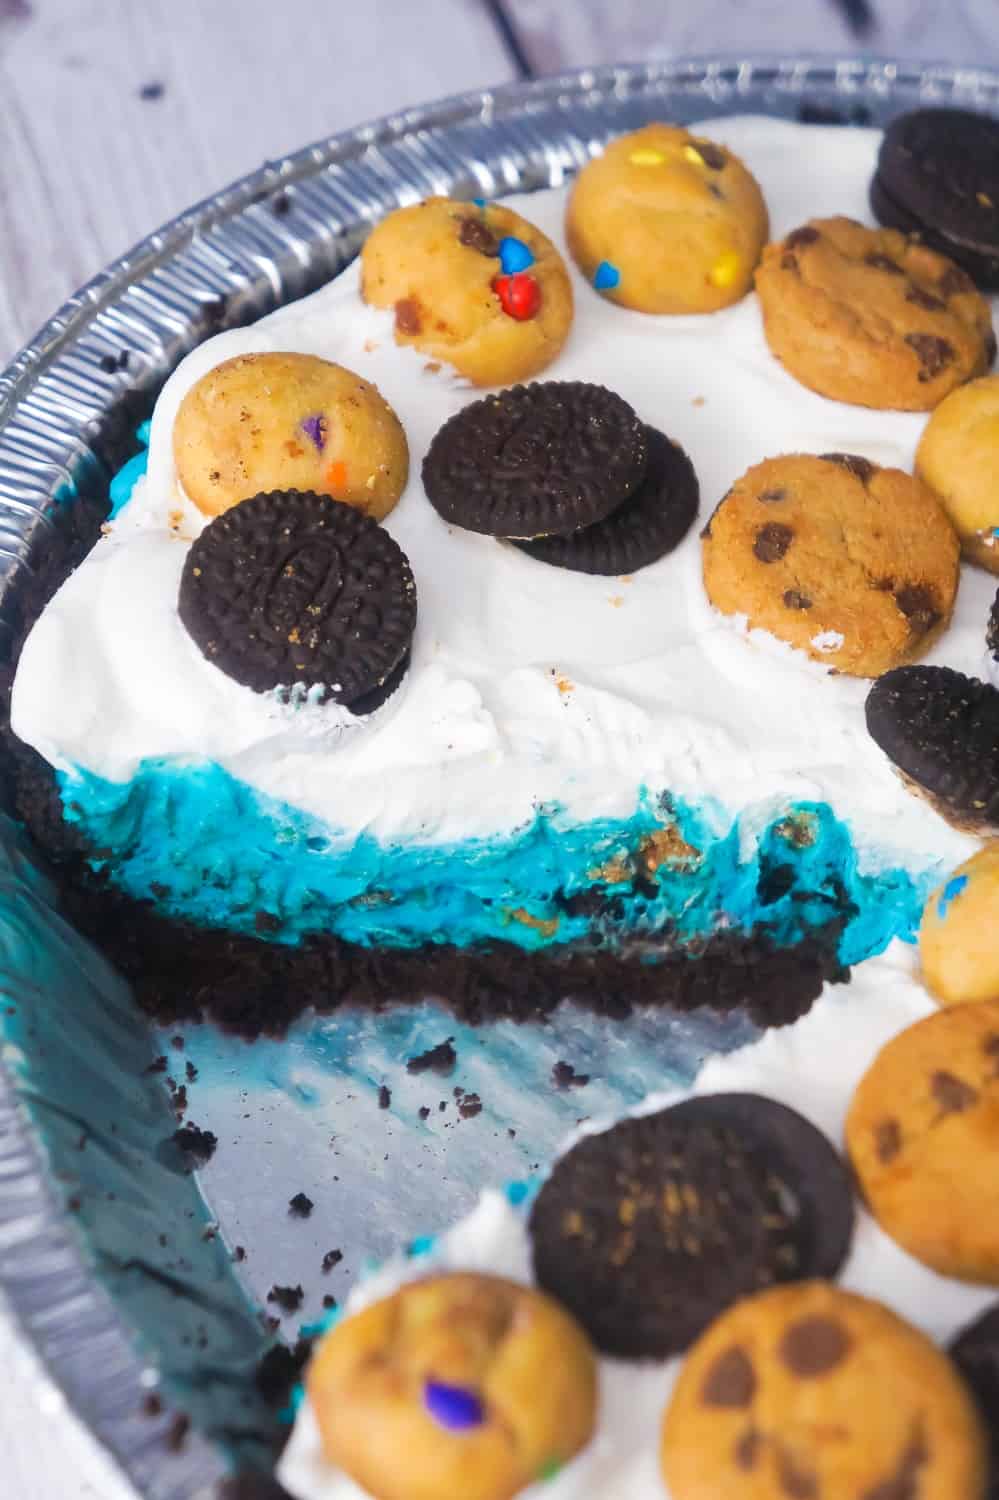 No Bake Cookie Monster Pie is an easy dessert recipe your kids will love. This colourful pie is made with instant pudding and Cool Whip in an Oreo crust and loaded with a variety of mini cookies.